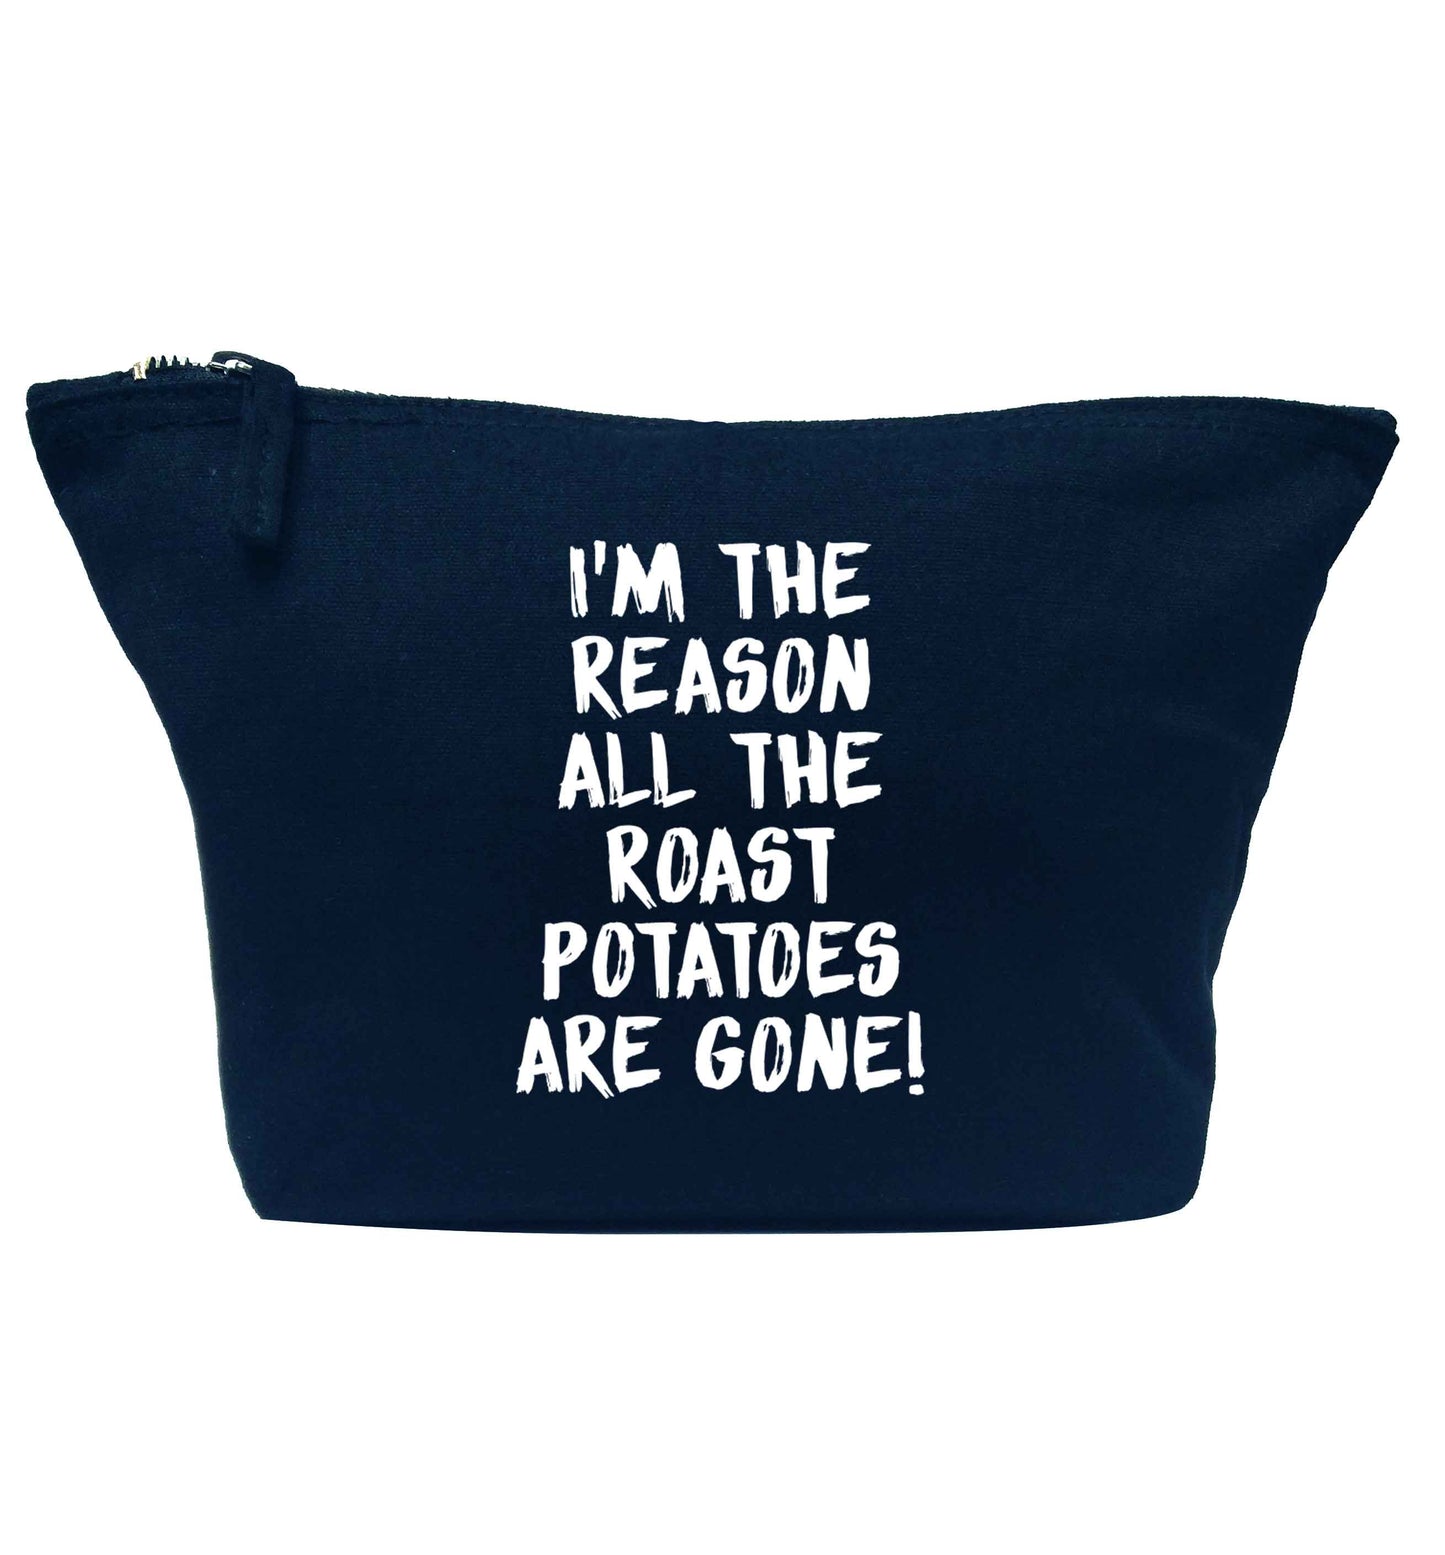 I'm the reason all the roast potatoes are gone navy makeup bag